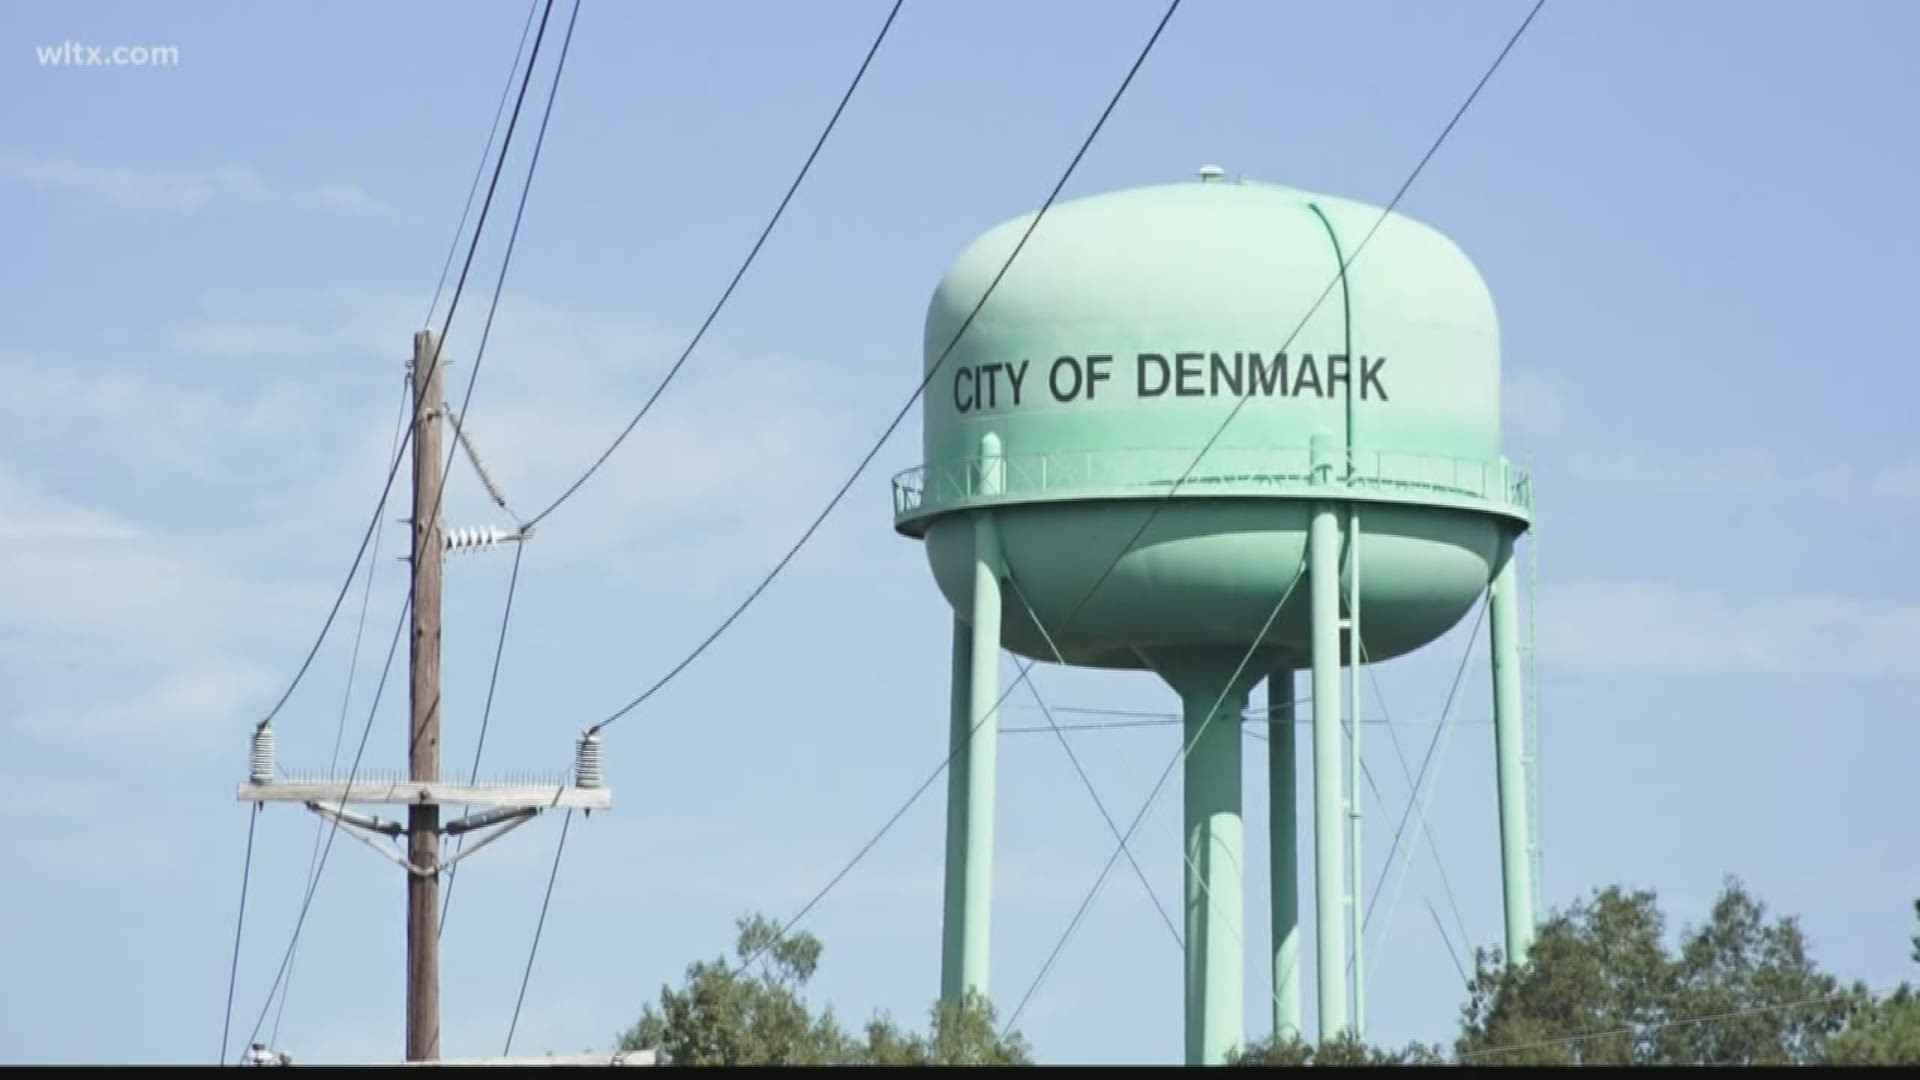 The City of Denmark plans to make $2.3 million worth of upgrades to their water distribution system.